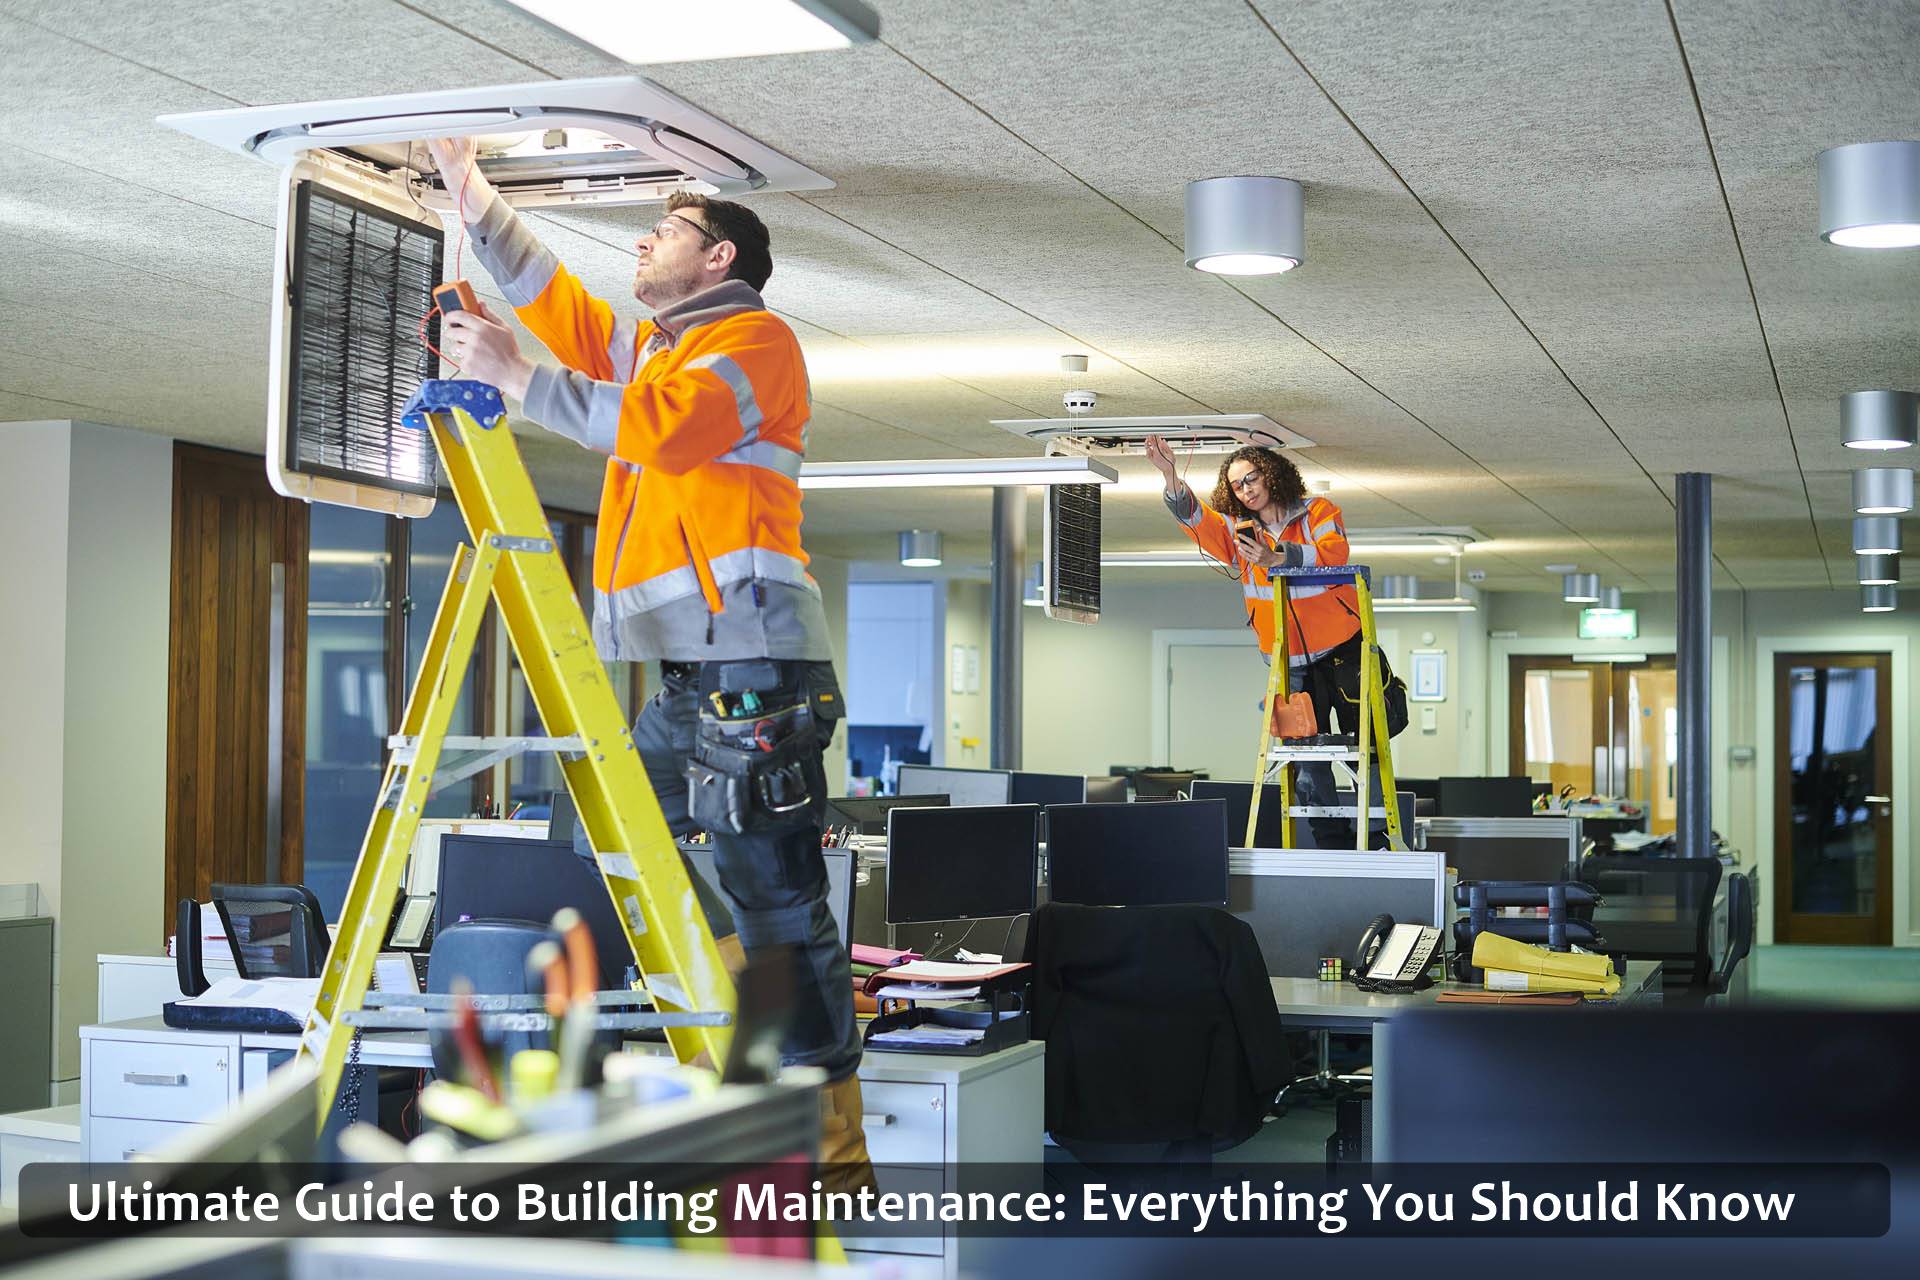 Ultimate Guide to Building Maintenance: Everything You Should Know